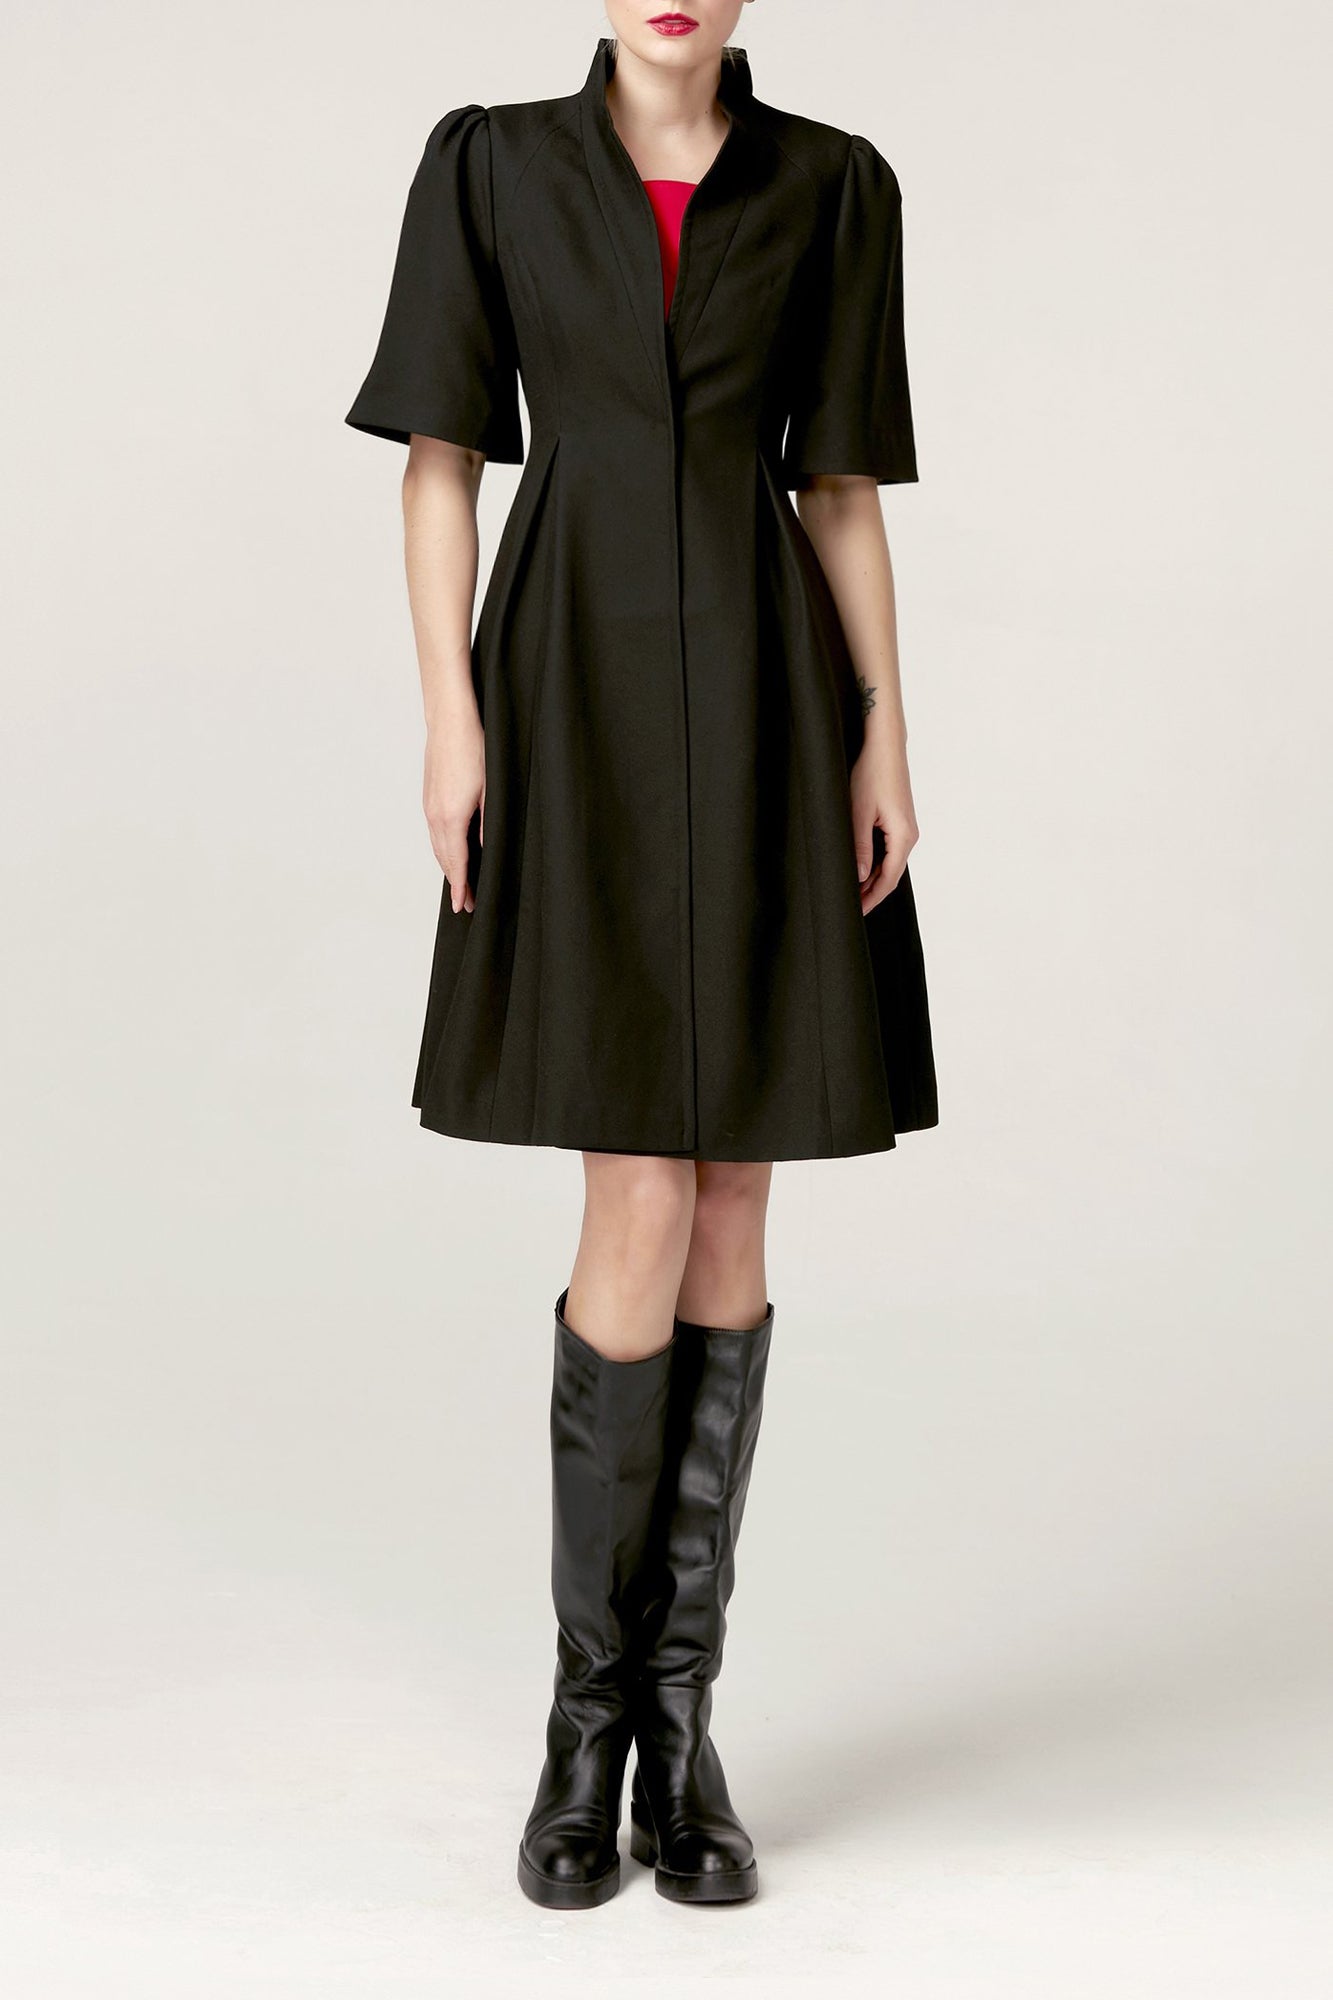 DL One & Only Han Collar Bell Sleeves Trench Coat/Blazer